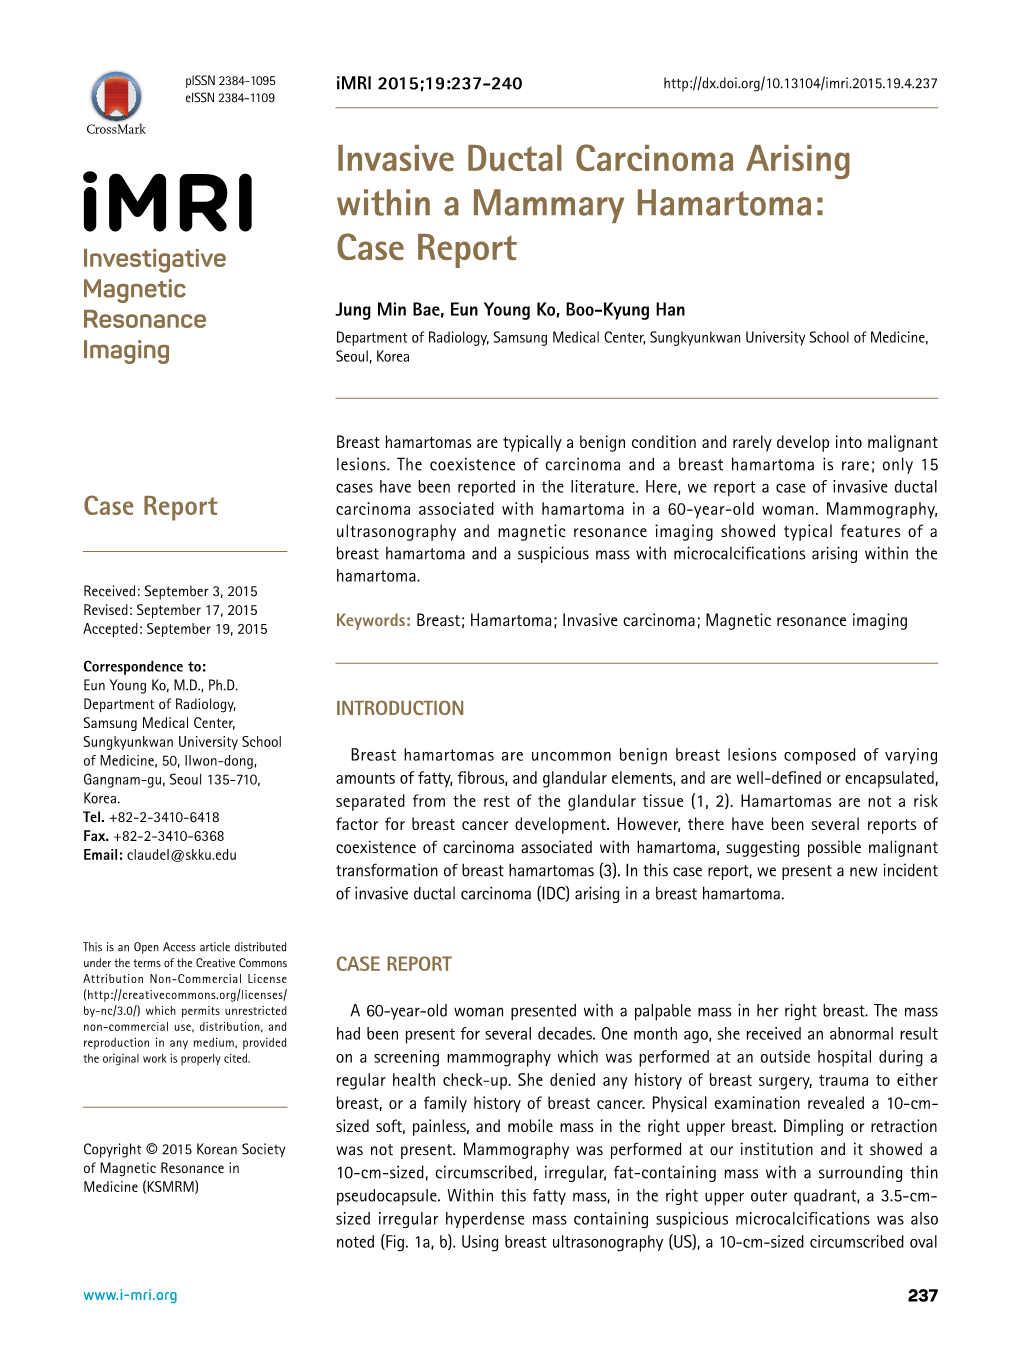 Invasive Ductal Carcinoma Arising Within a Mammary Hamartoma: Case Report